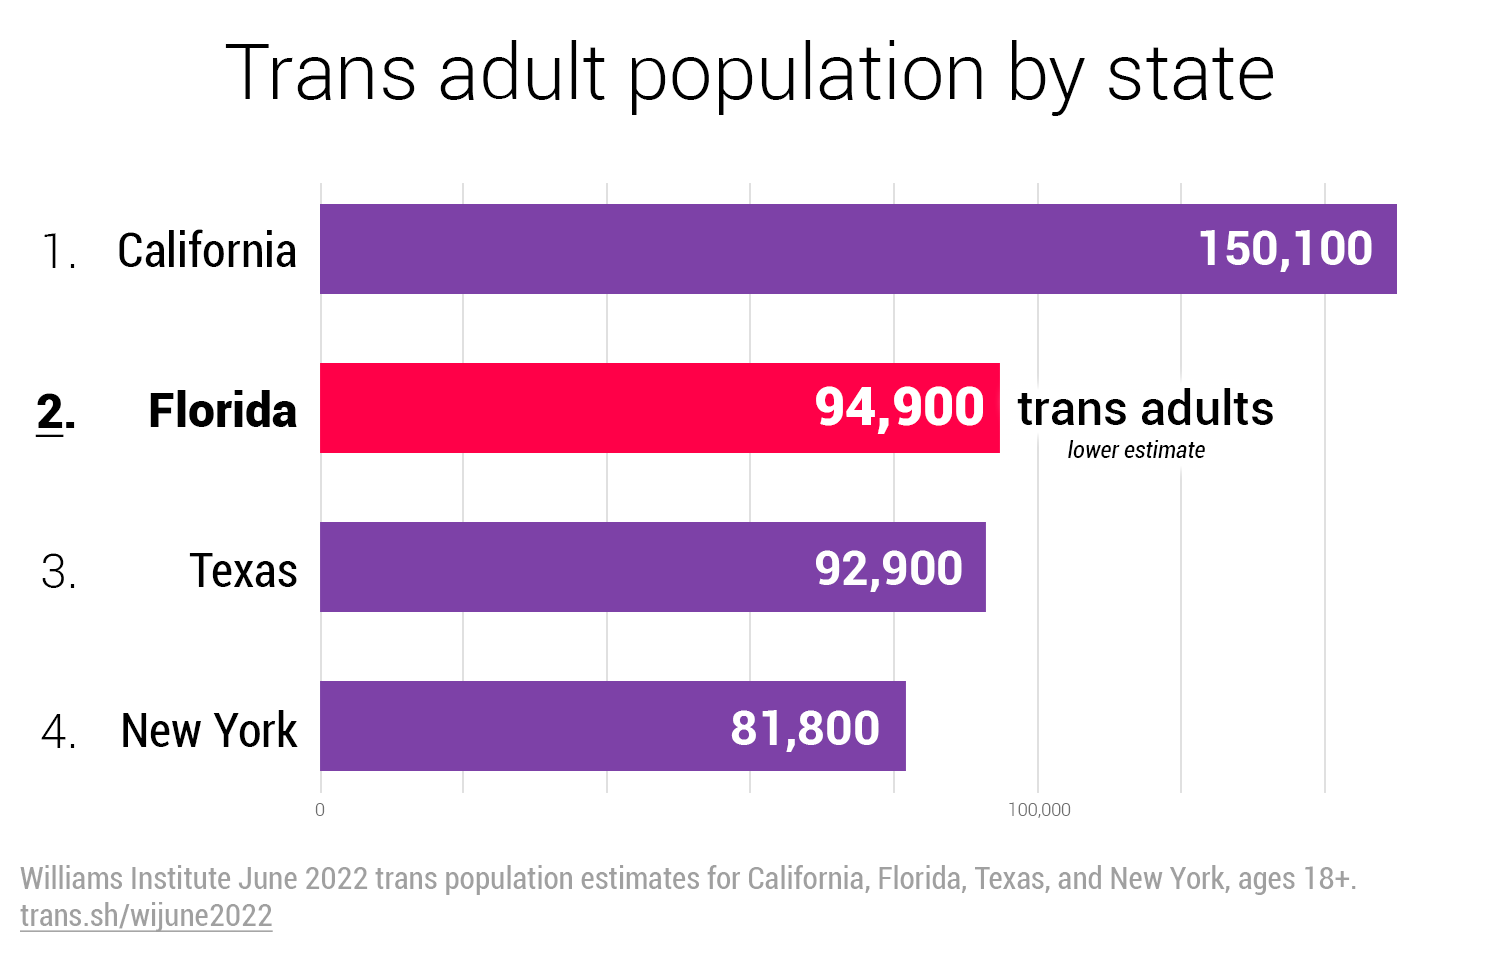 Trans adult population by state. Number 1: California, 150,100 trans adults. 2: Florida, 94,900. 3: Texas, 92,900. New York: 81,800. Source: Williams Institute June 2022 trans population estimates for California, Florida, Texas, and New York, ages 18+. https://trans.sh/wijune2022